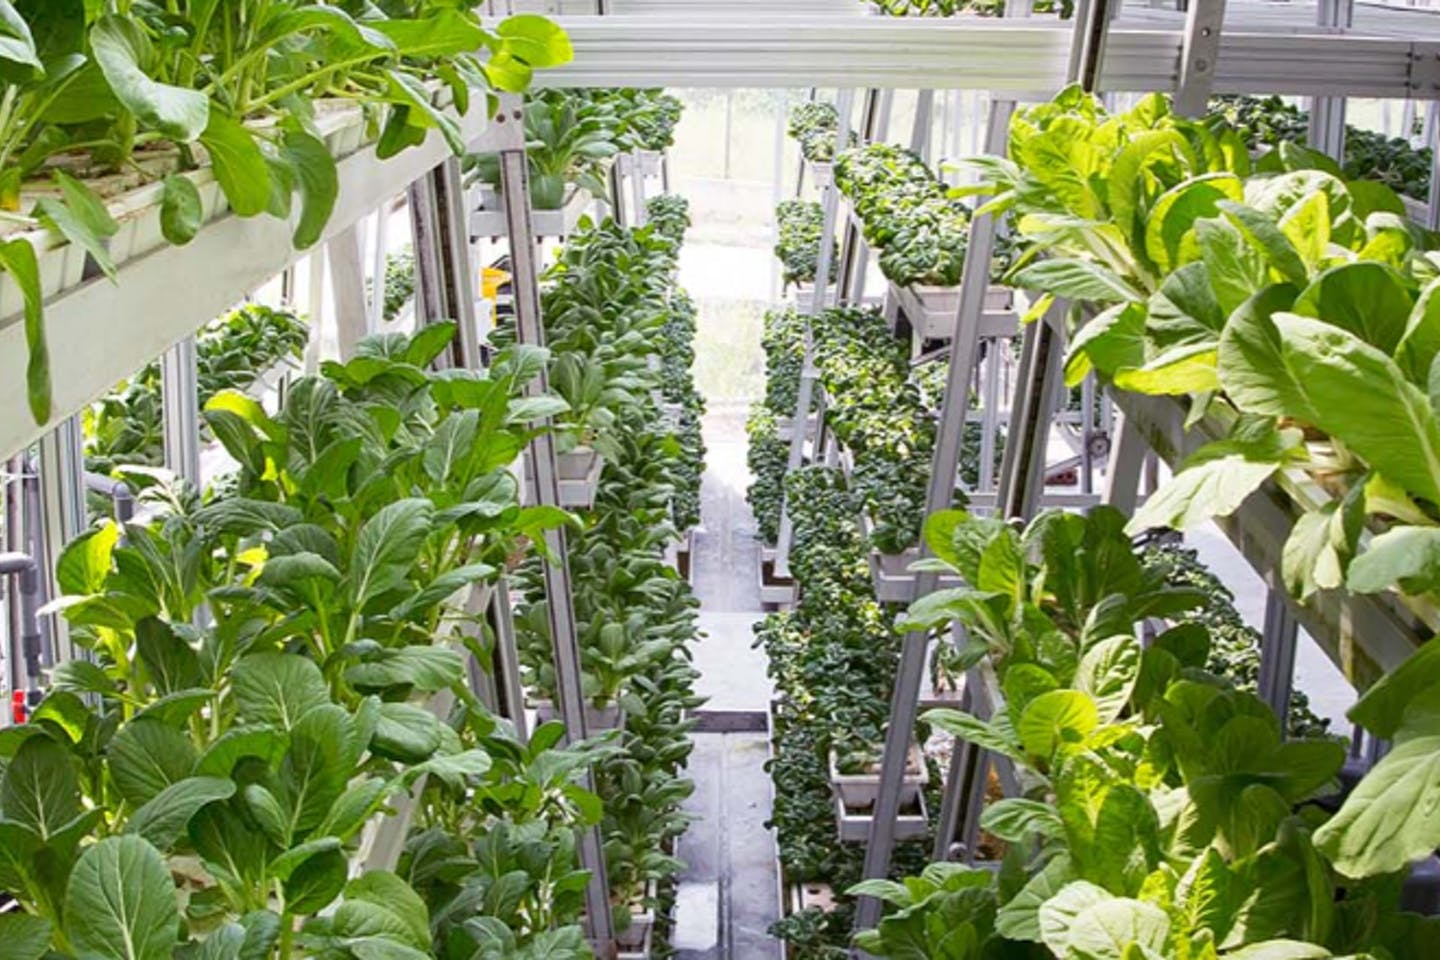 Sky Greens in Singapore an example of a Vertical Farm